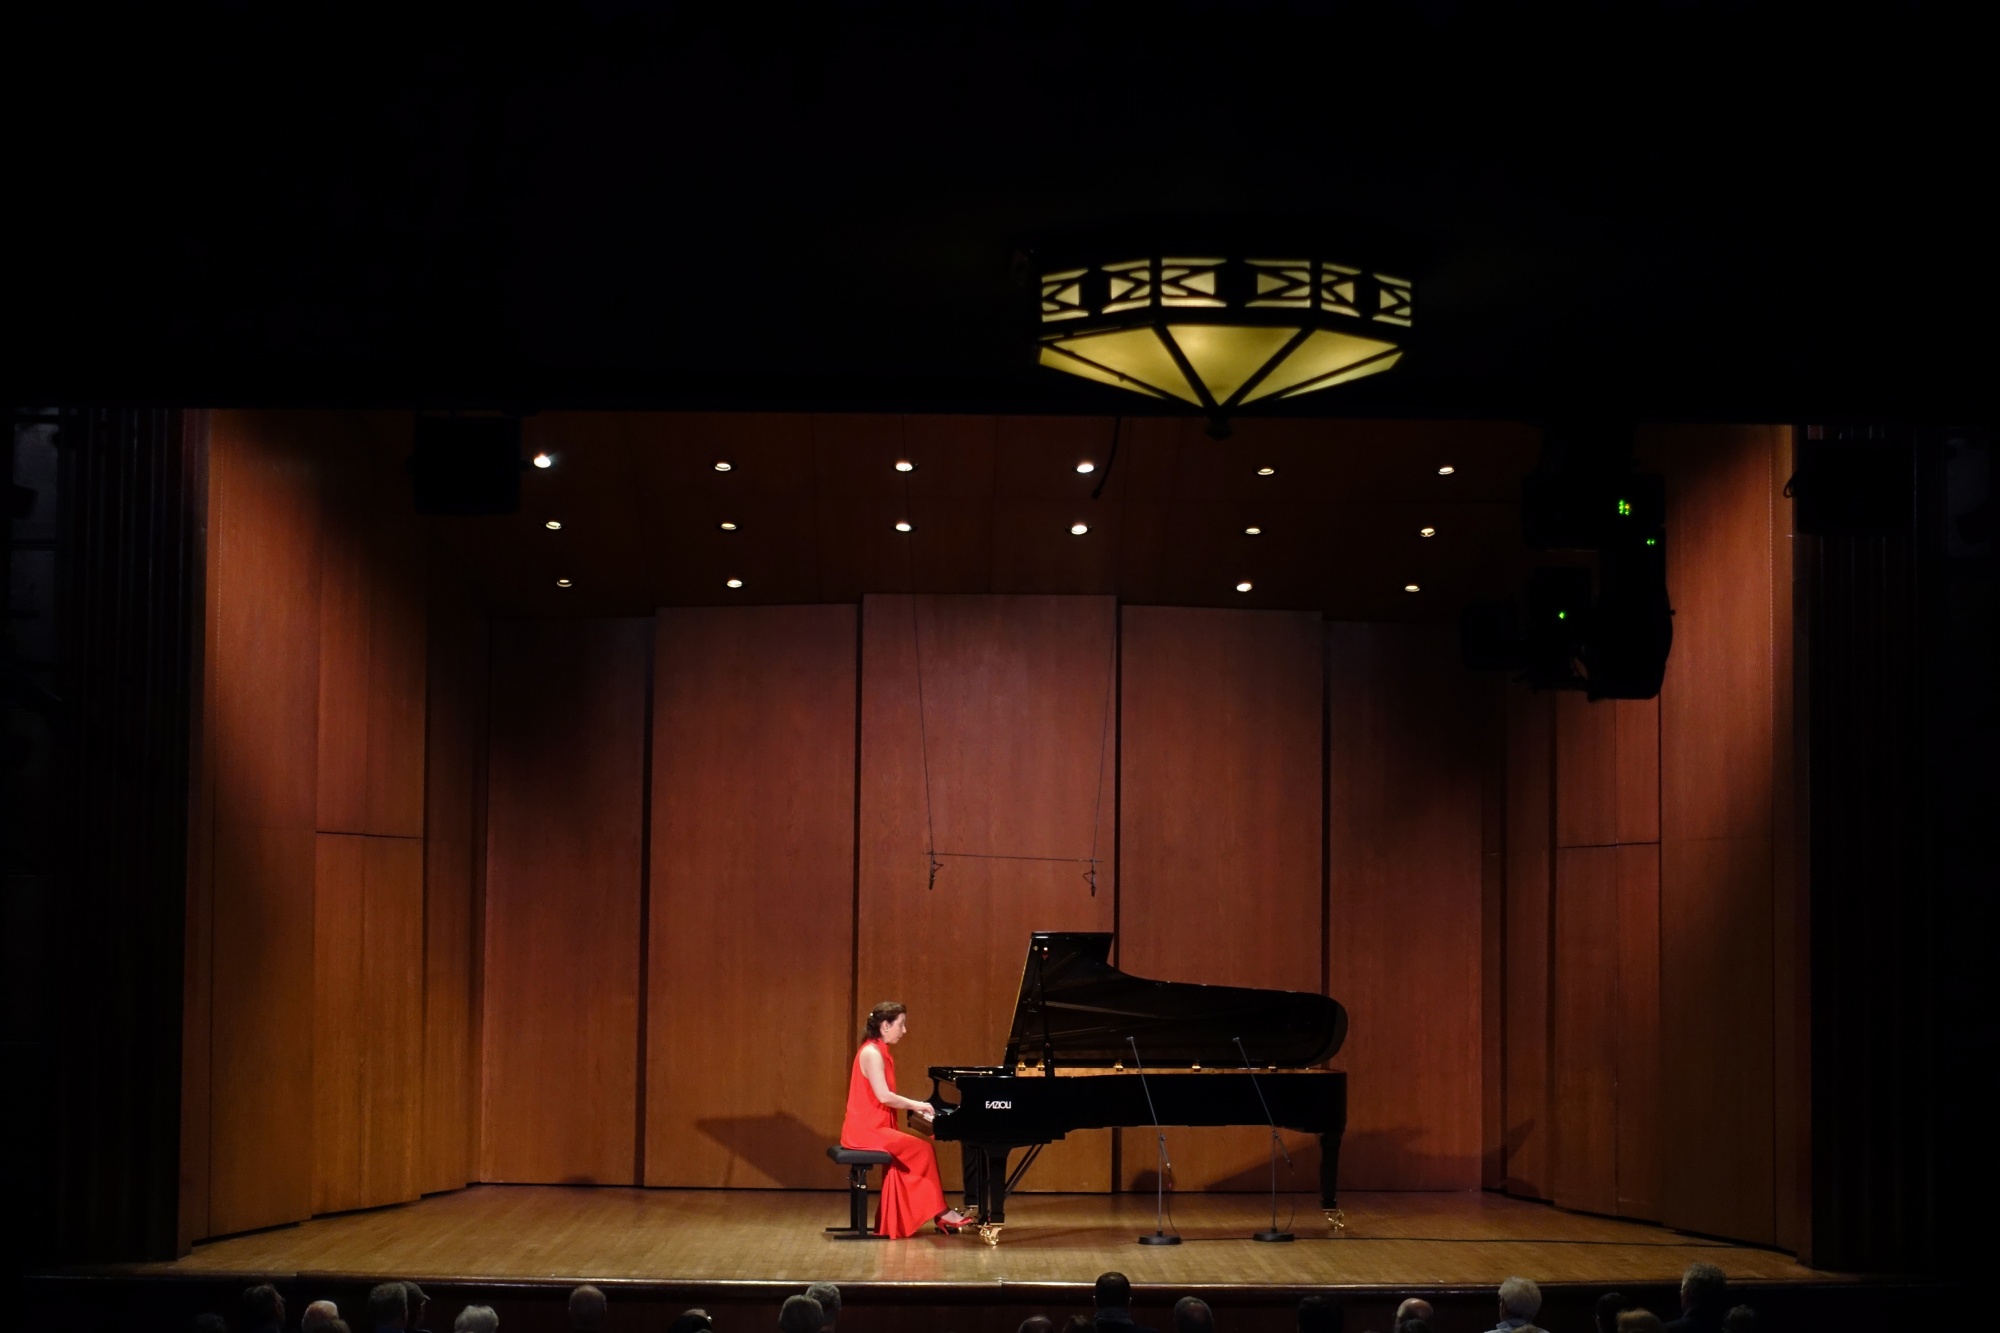 Canadian pianist Angela Hewitt performs at the 92nd Street Y in&nbsp;New York City in 2019.&nbsp;

&nbsp;